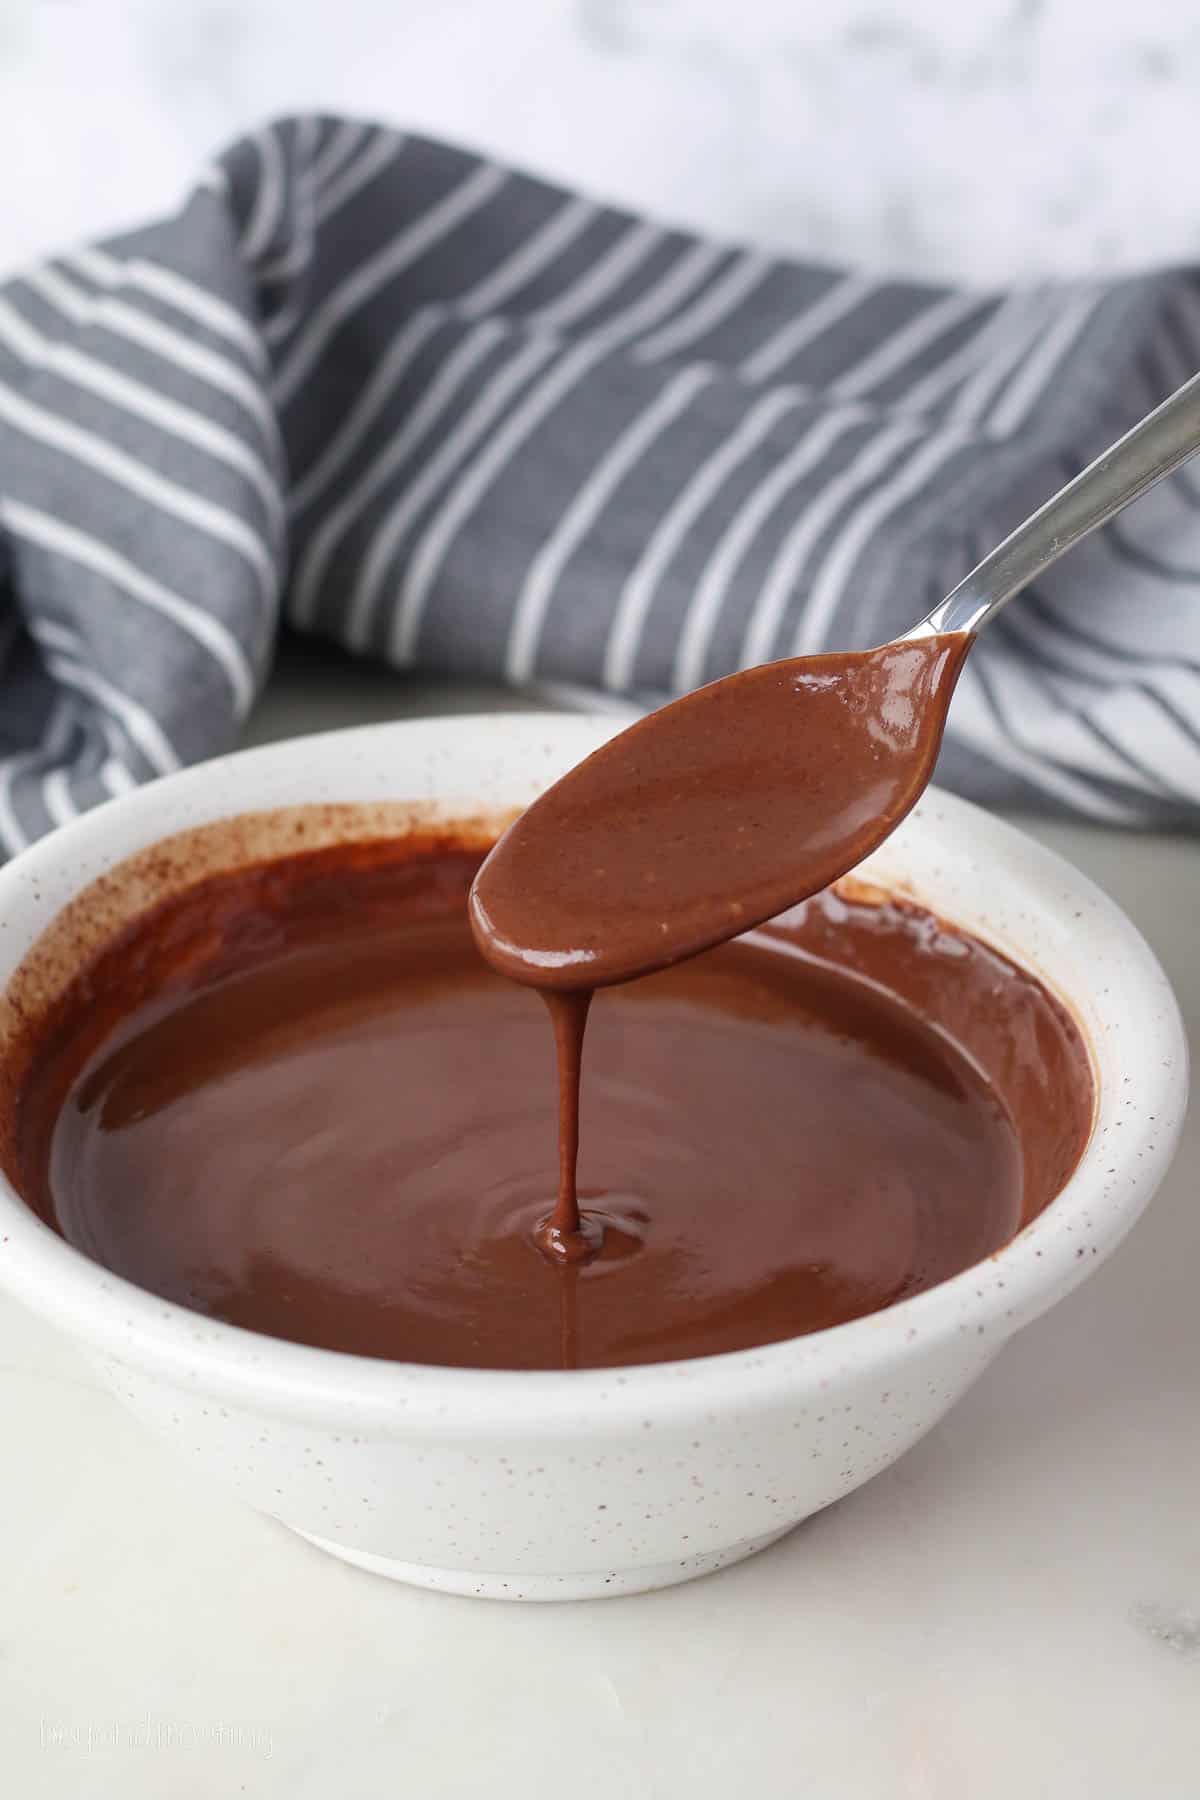 Chocolate ganache dripping from a spoon into a small white bowl.